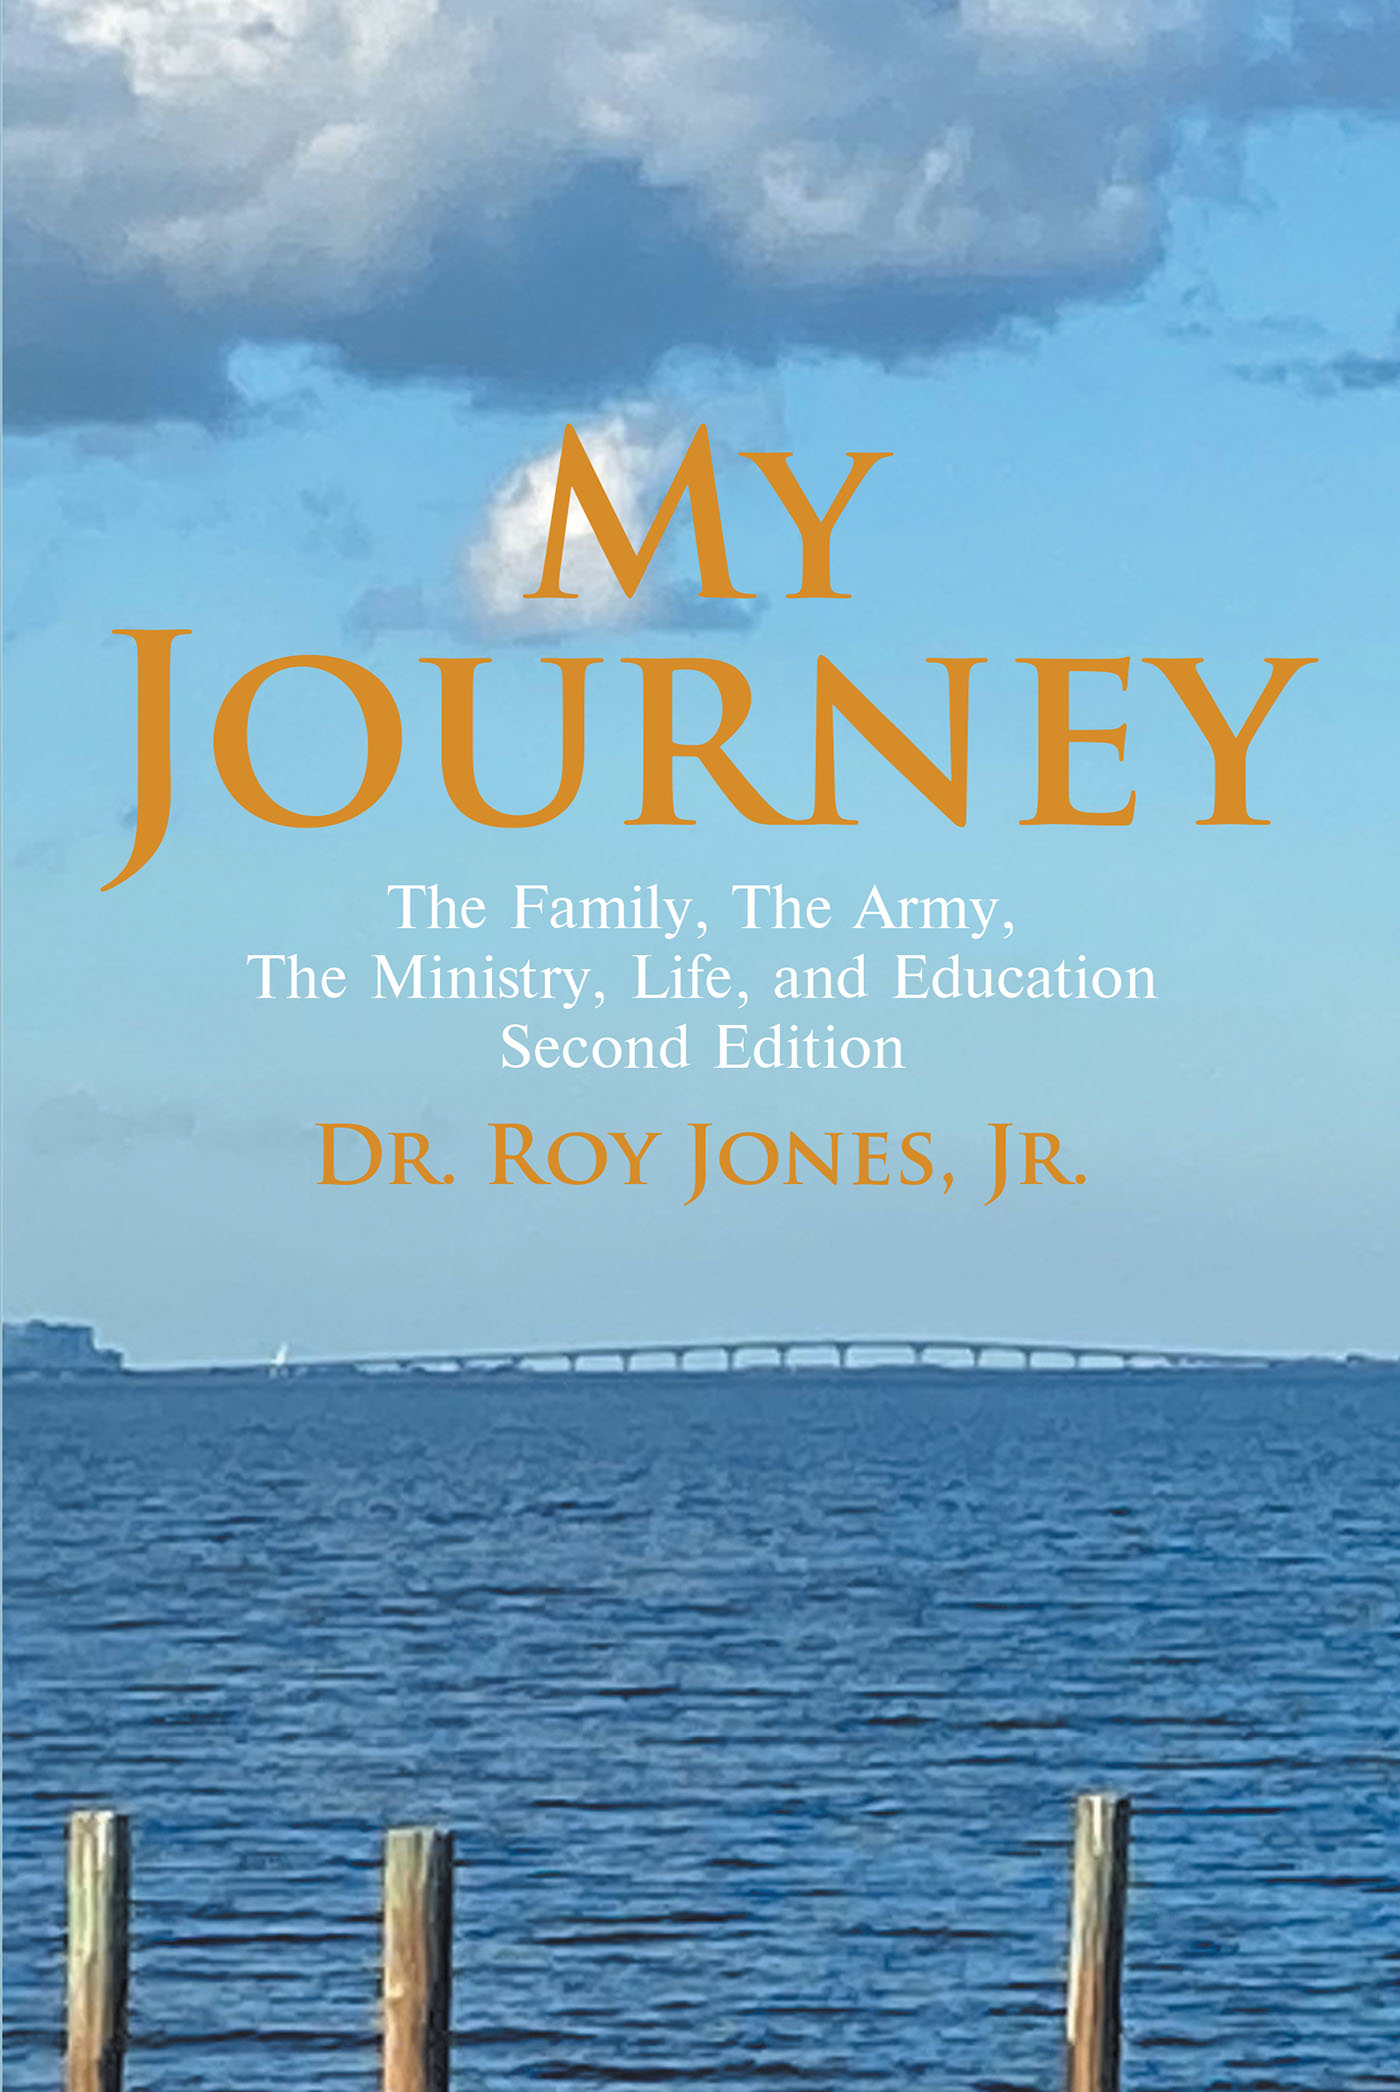 Dr. Roy Jones, Jr’s Newly Released “My Journey: My Family, The Army, The Ministry, Life, And Education Second Edition,” is a Dynamic Personal and Familial Memoir